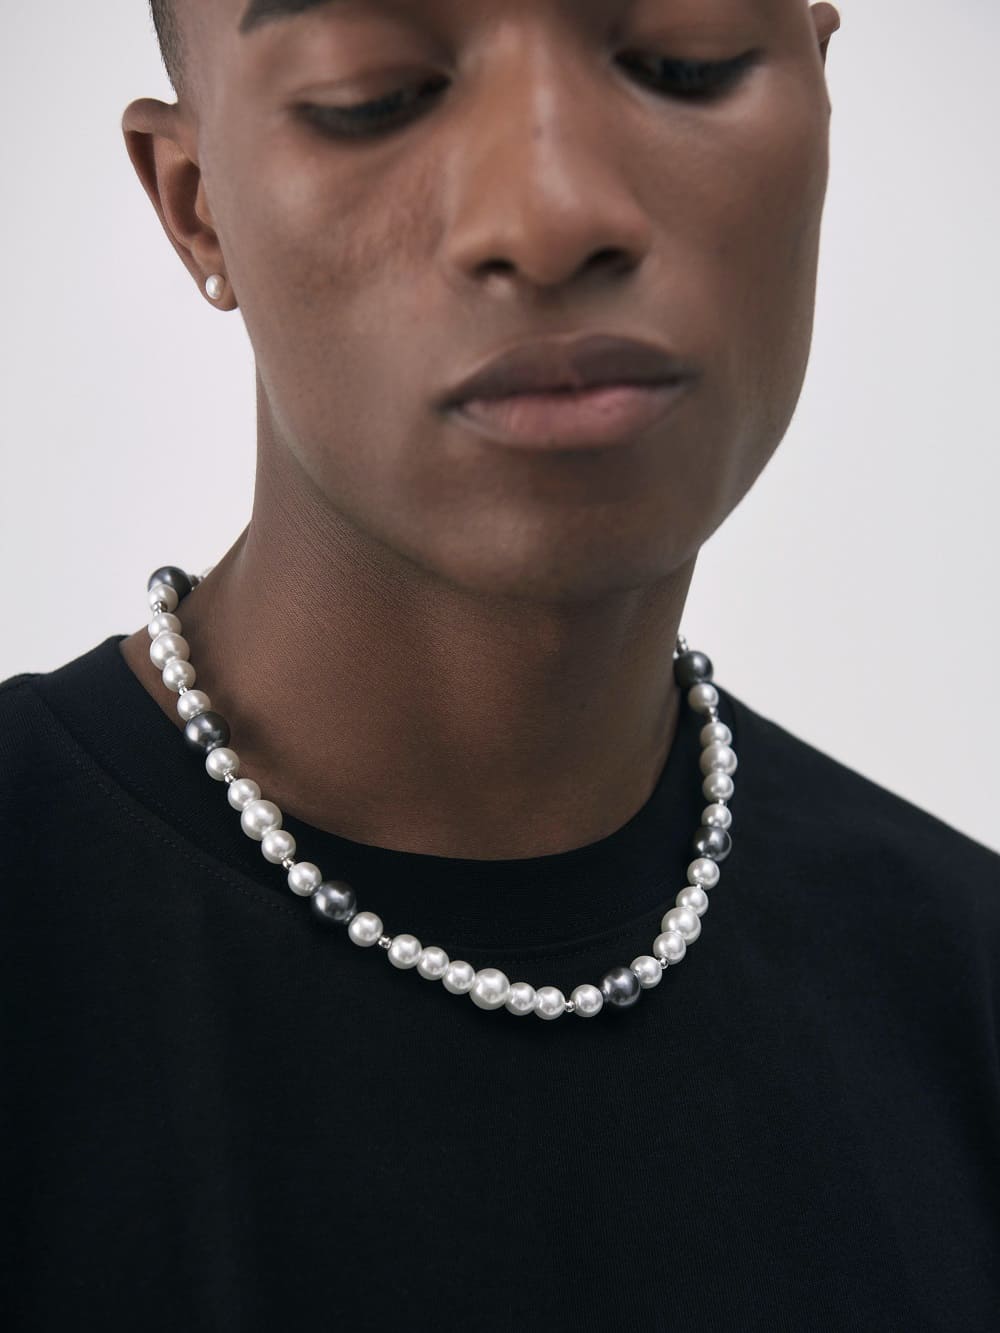 Men's Pearl Necklace with Hand-Painted Glass Beads | Mens pearl necklace,  Necklace, Glass beads